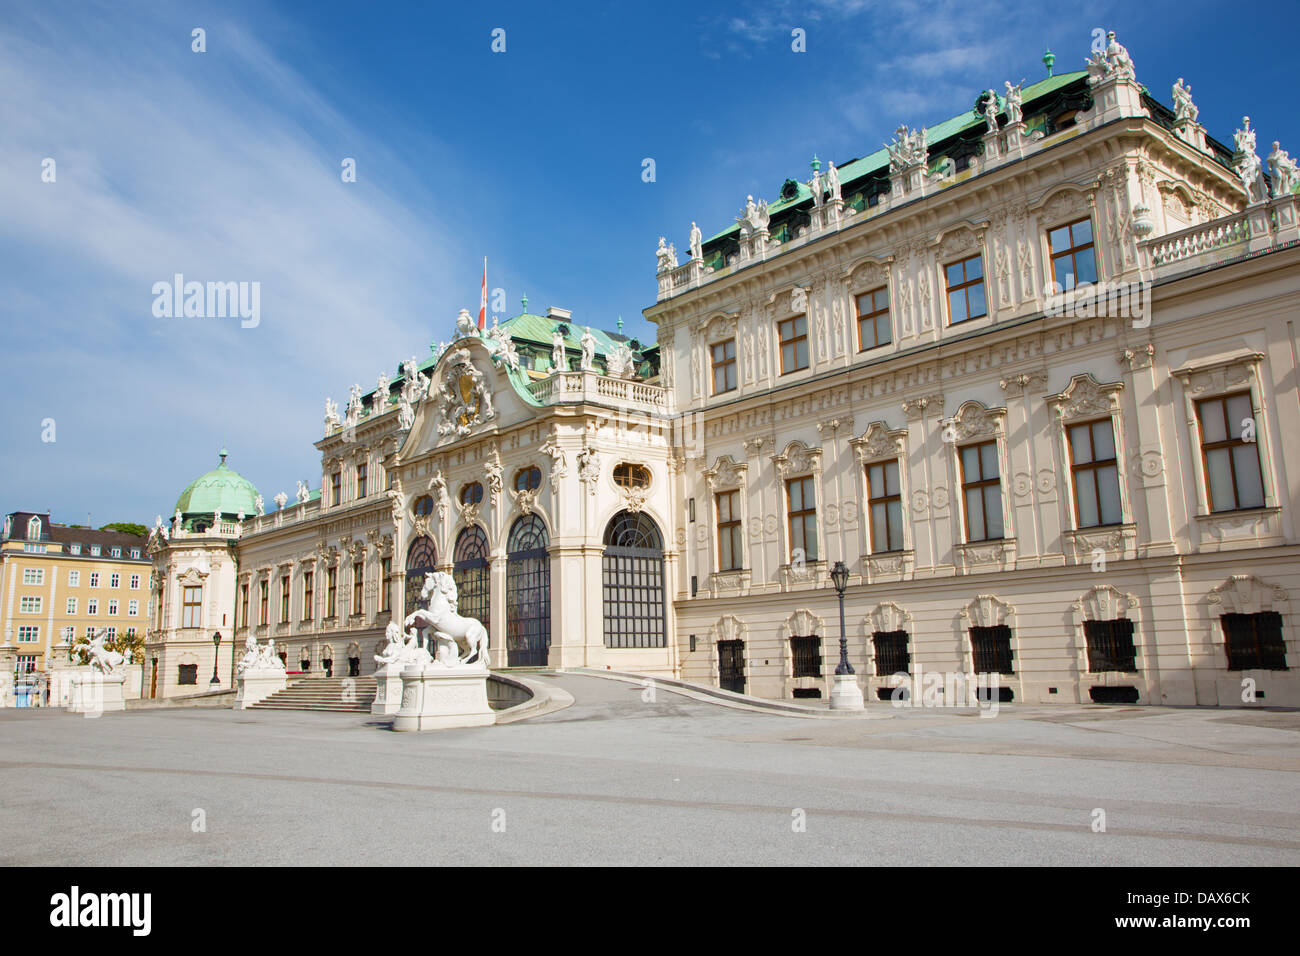 Vienna - Belvedere palace in morning light Stock Photo